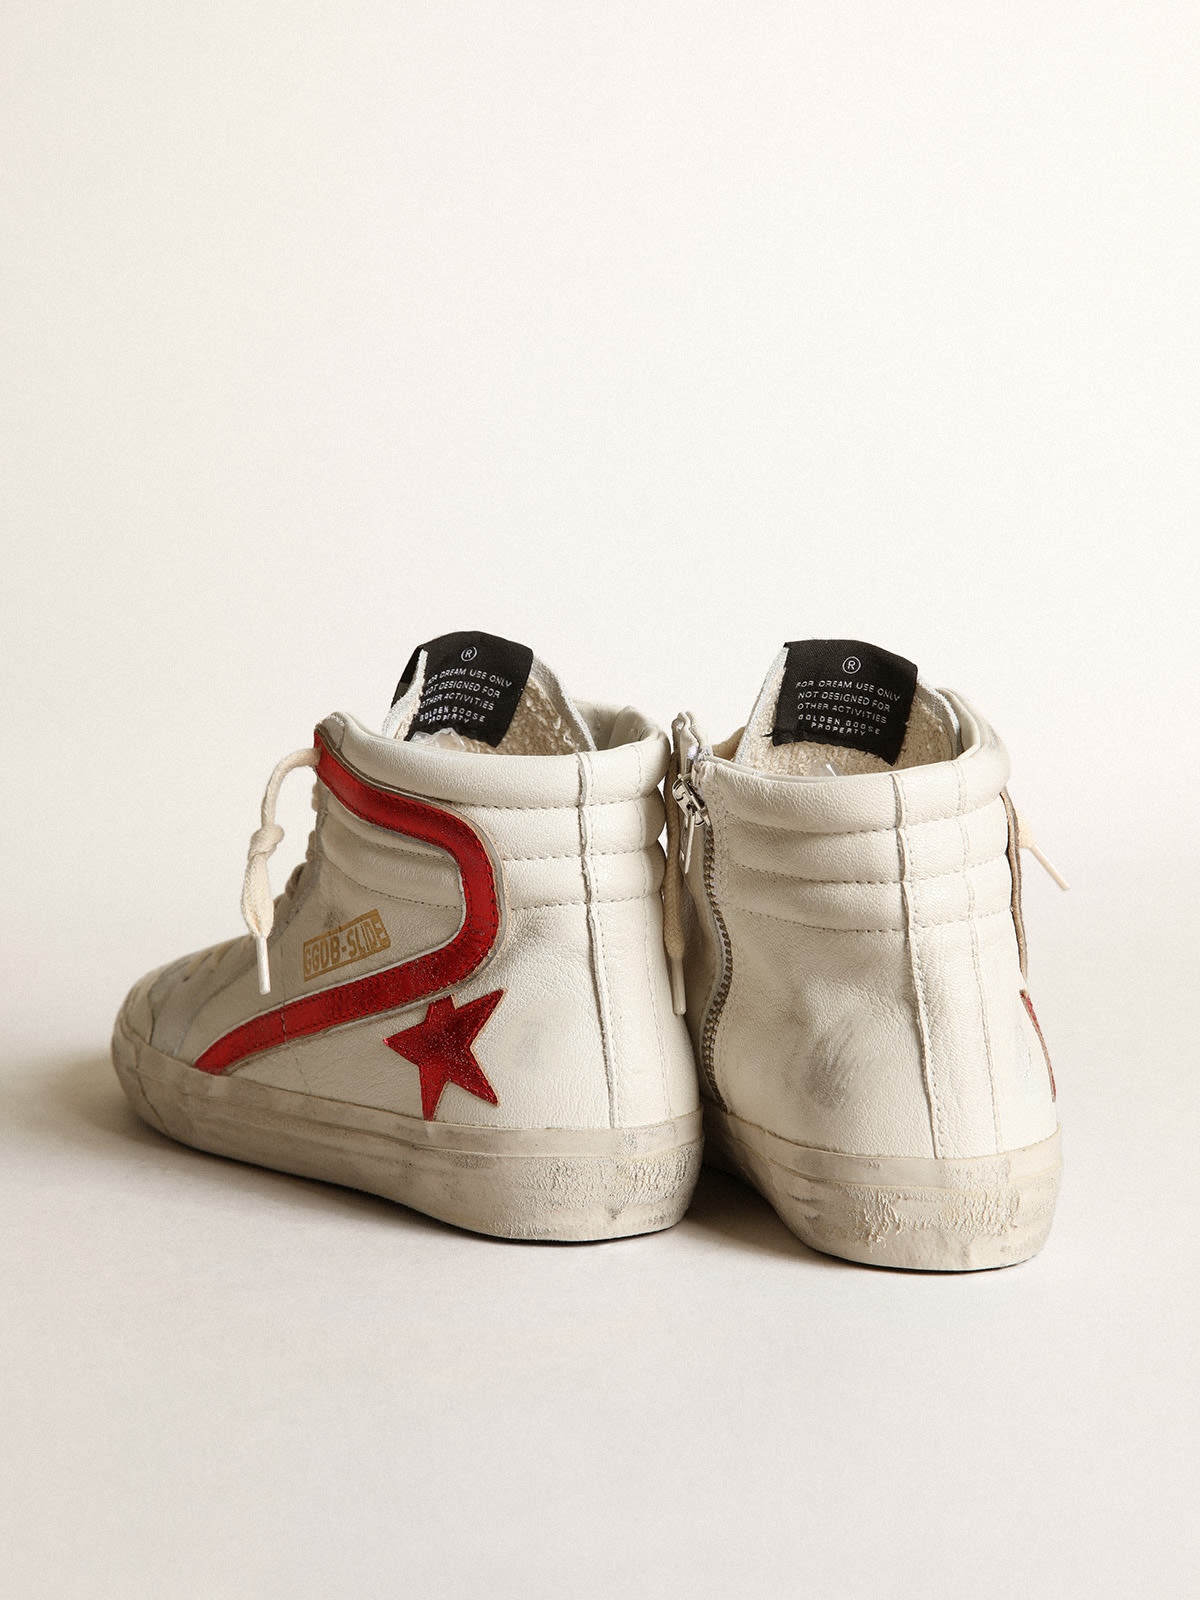 Golden Goose Slide with a red laminated leather star and flash | REVERSIBLE